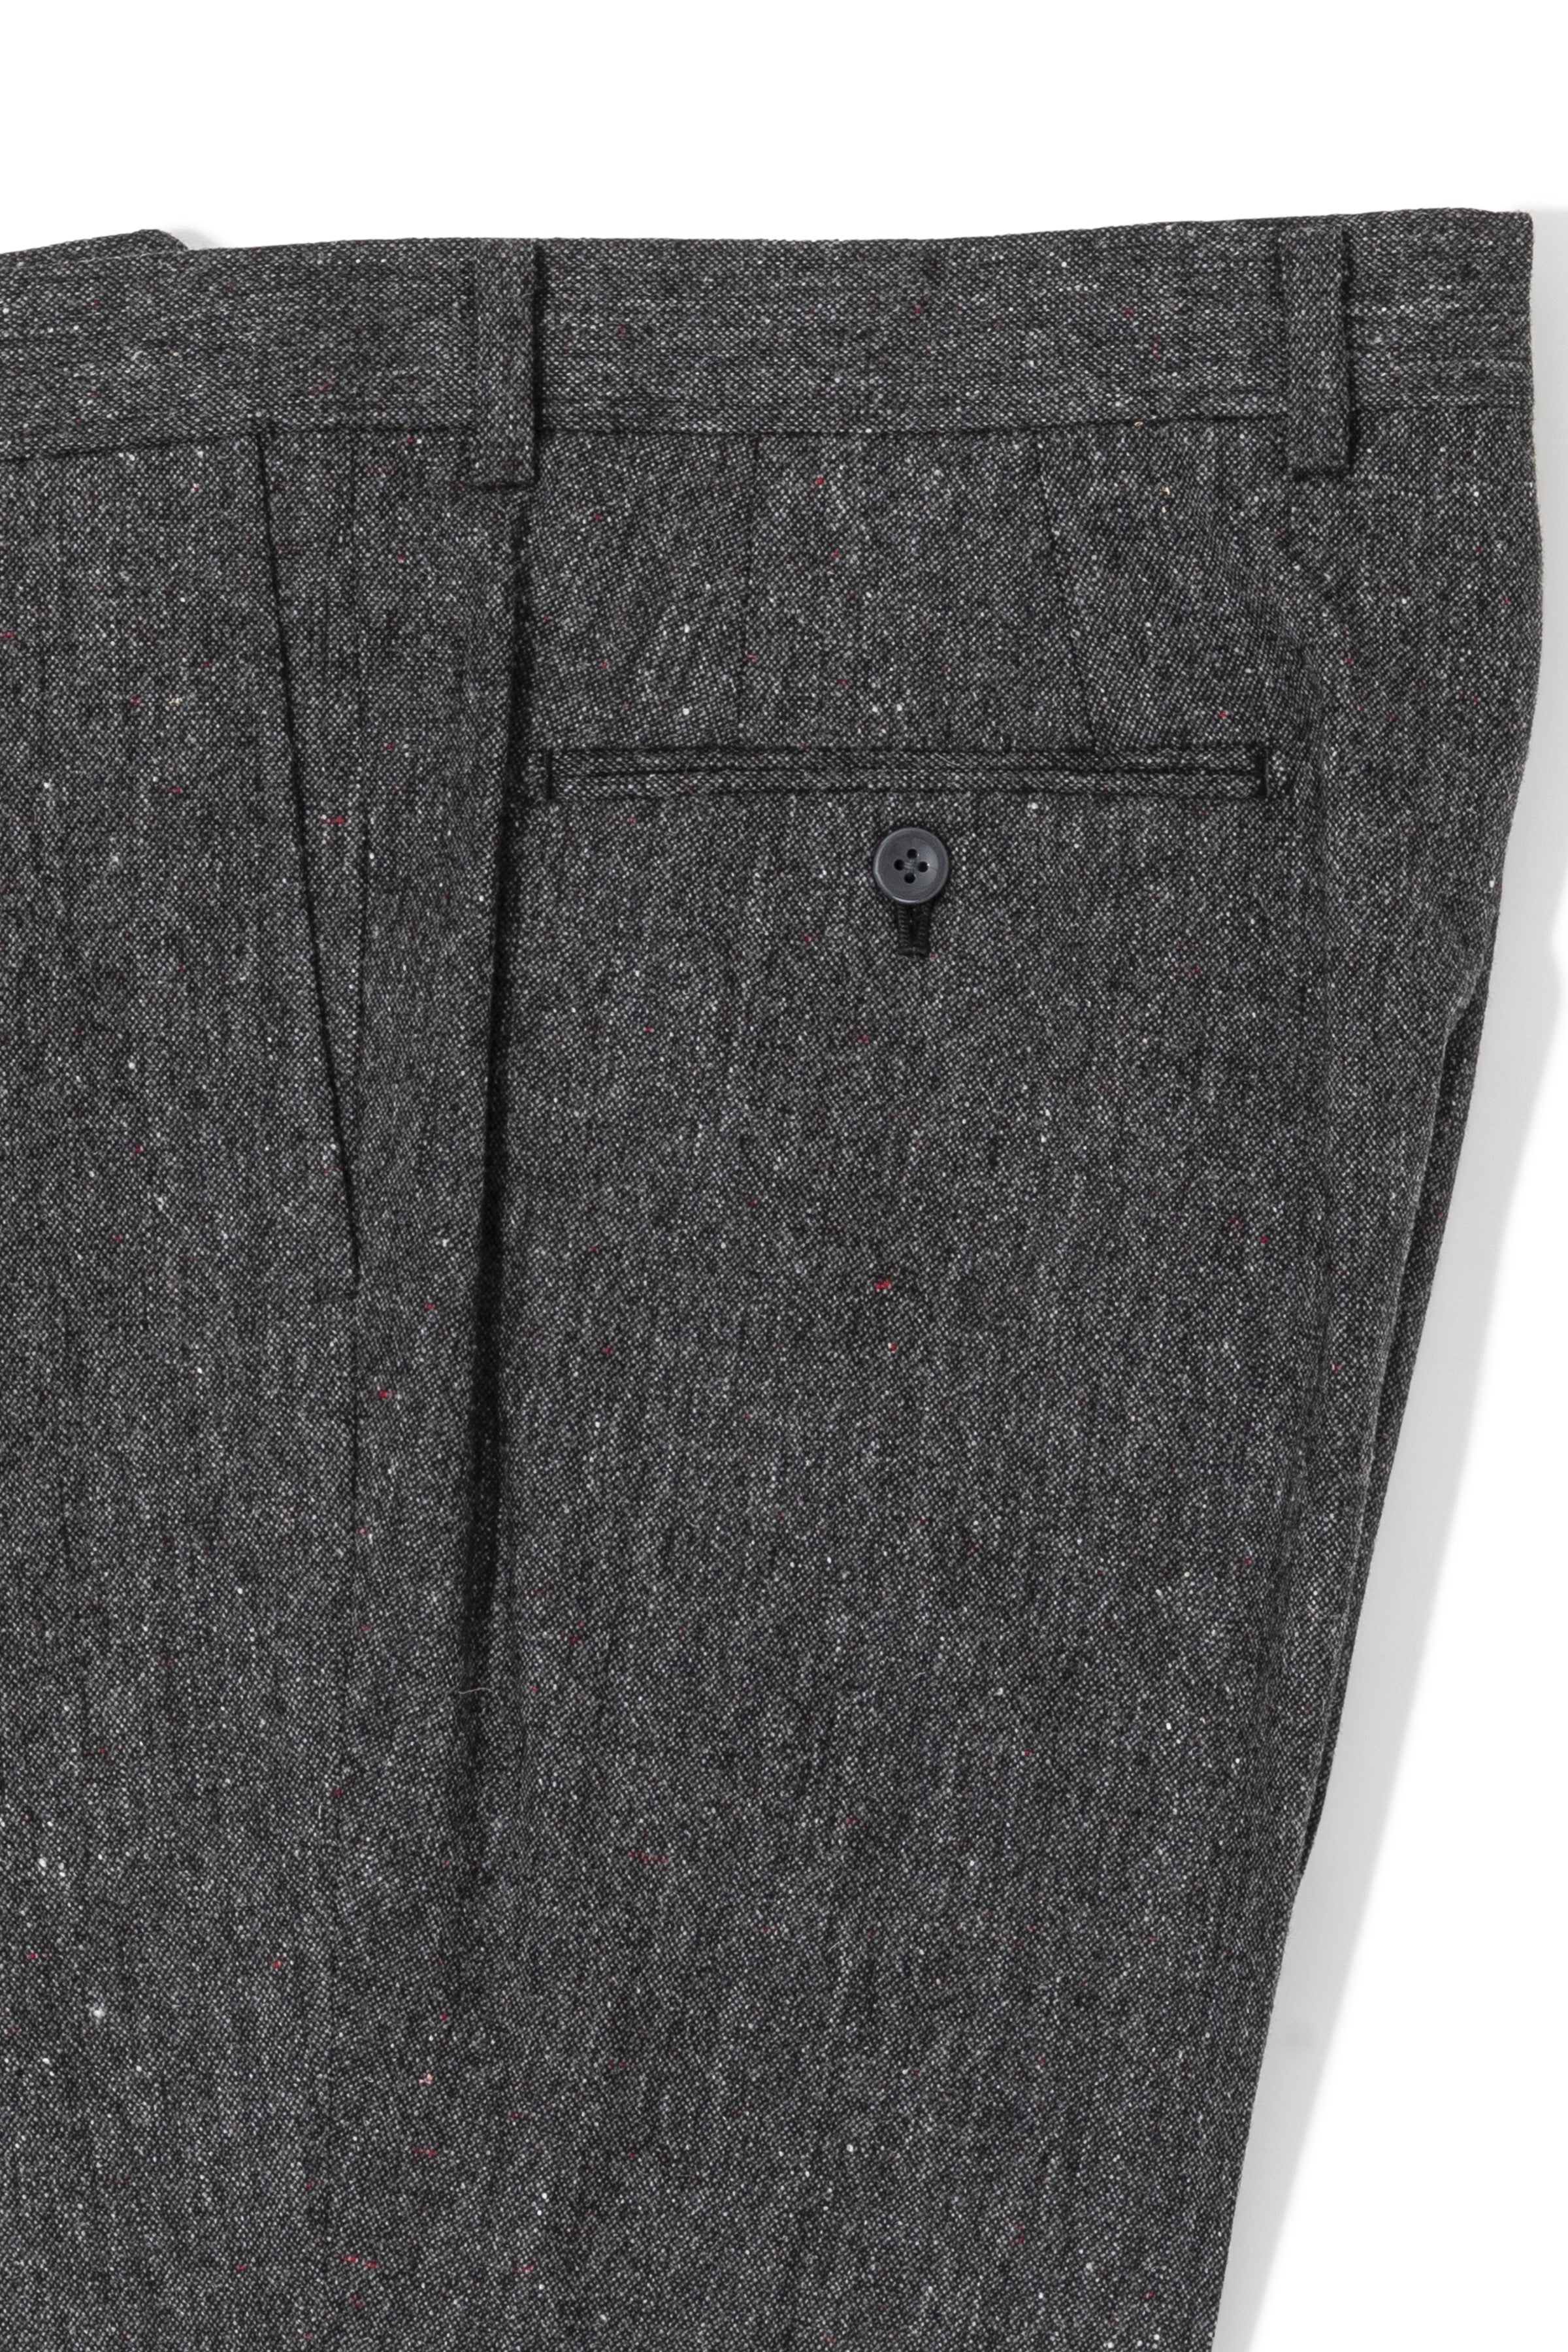 The Armoury by Ring Jacket Model B Dark Grey Wool Donegal Trousers